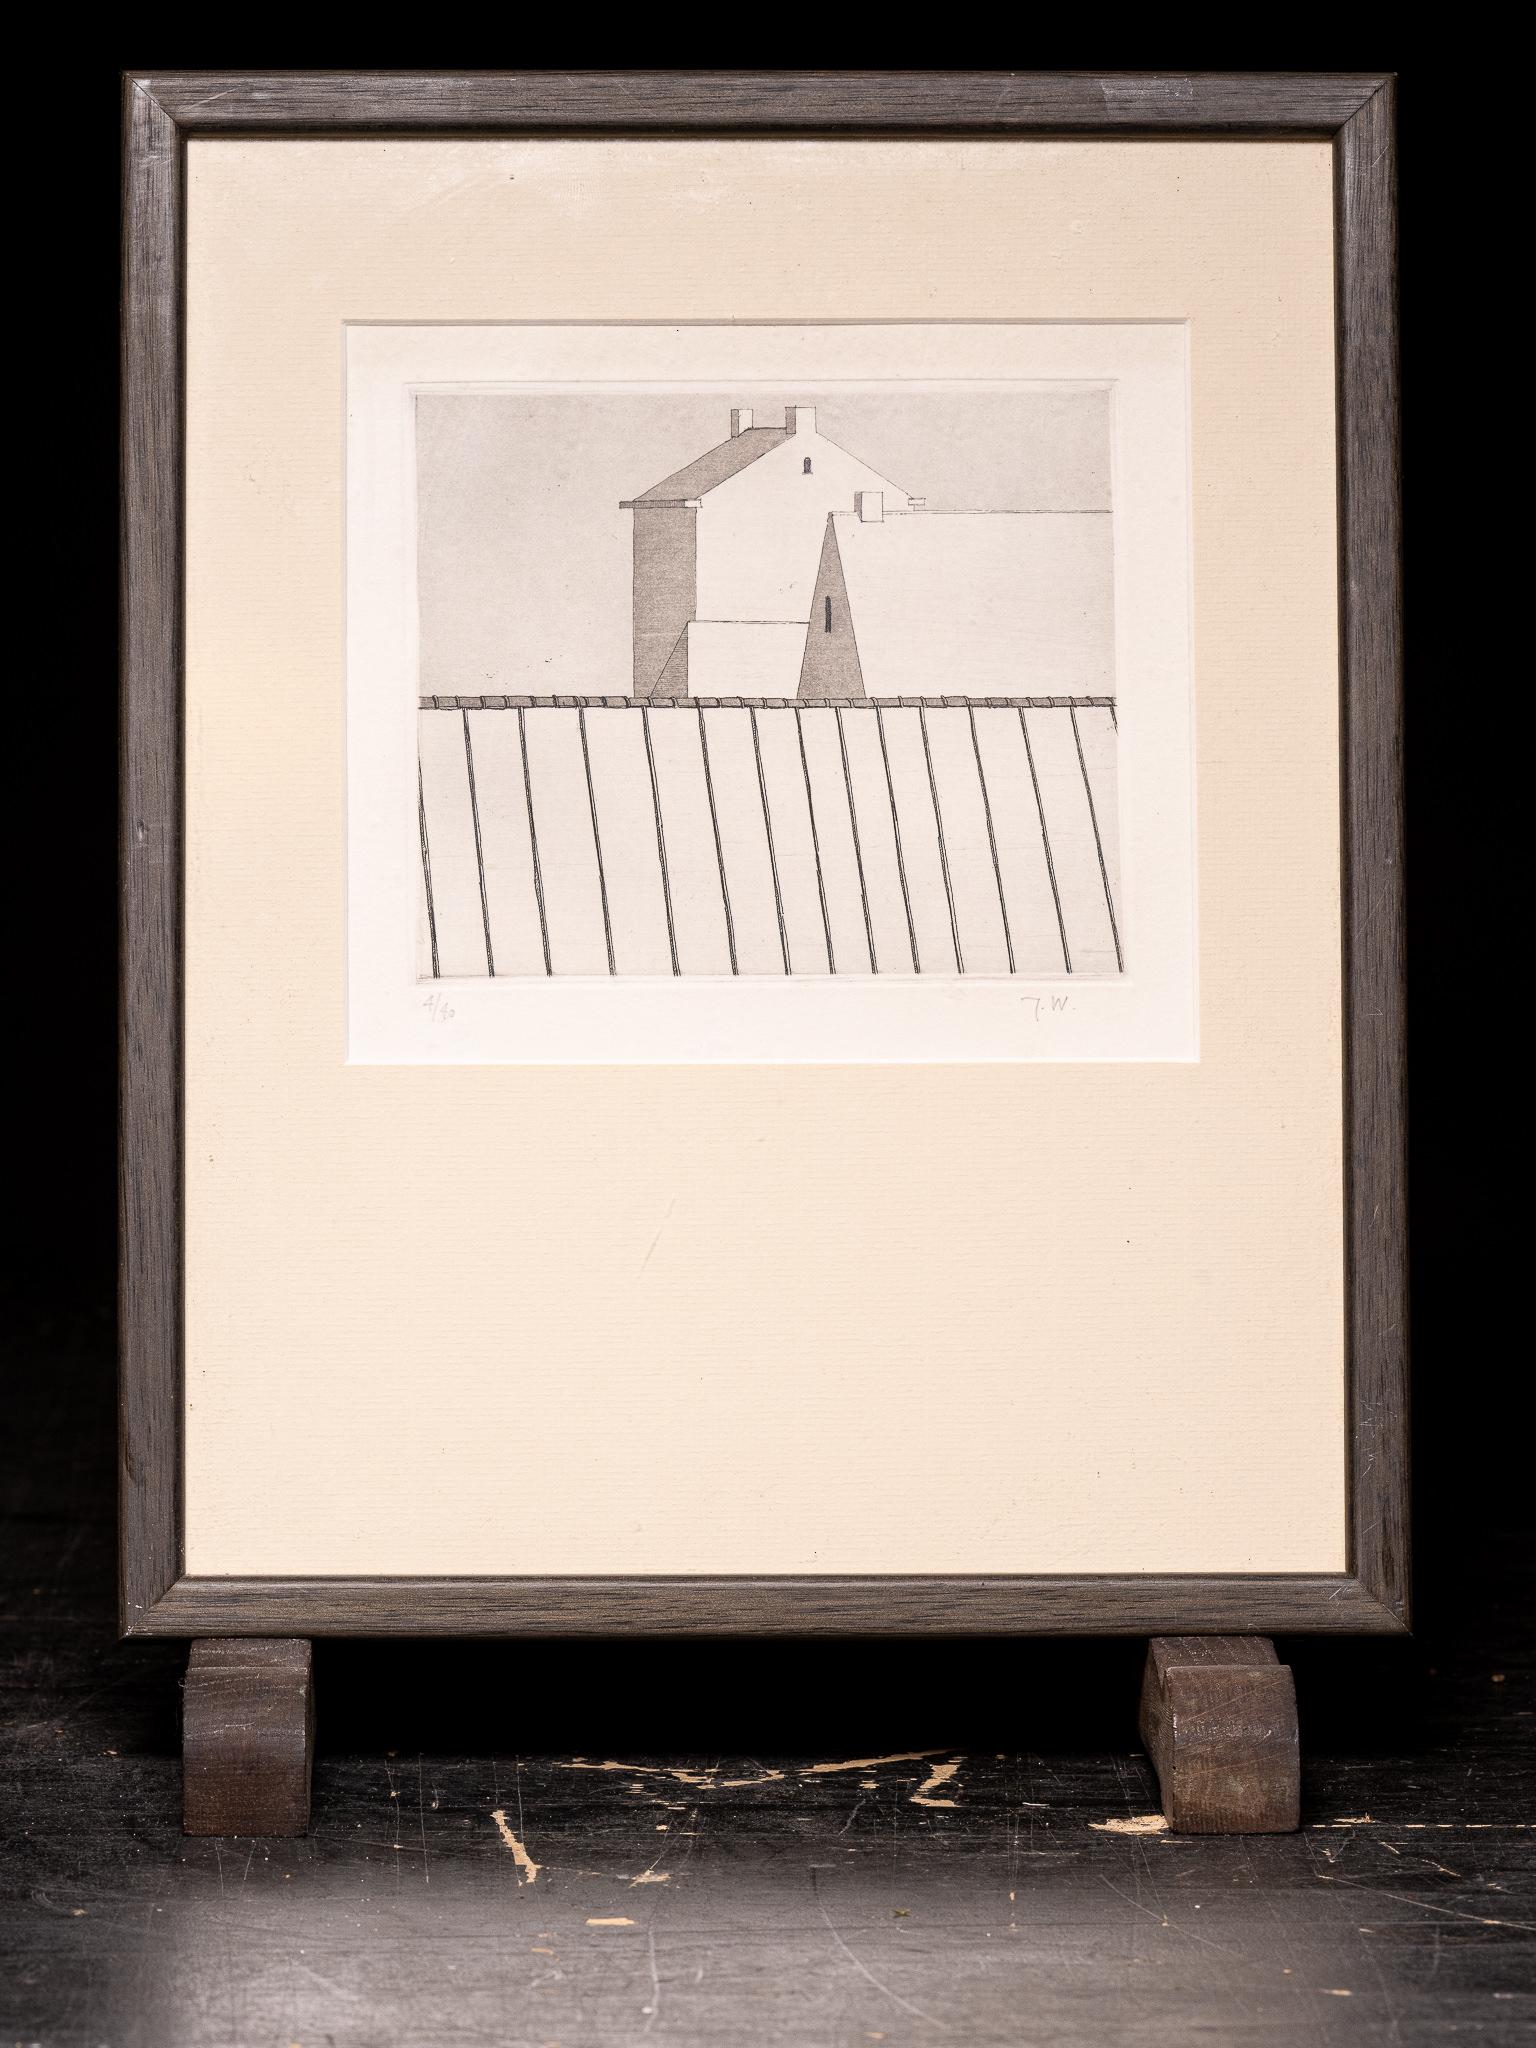 Three framed geometric Drawings.Two initialed J D 4/40.One not signed same hand. - White Landscape Art by Unknown